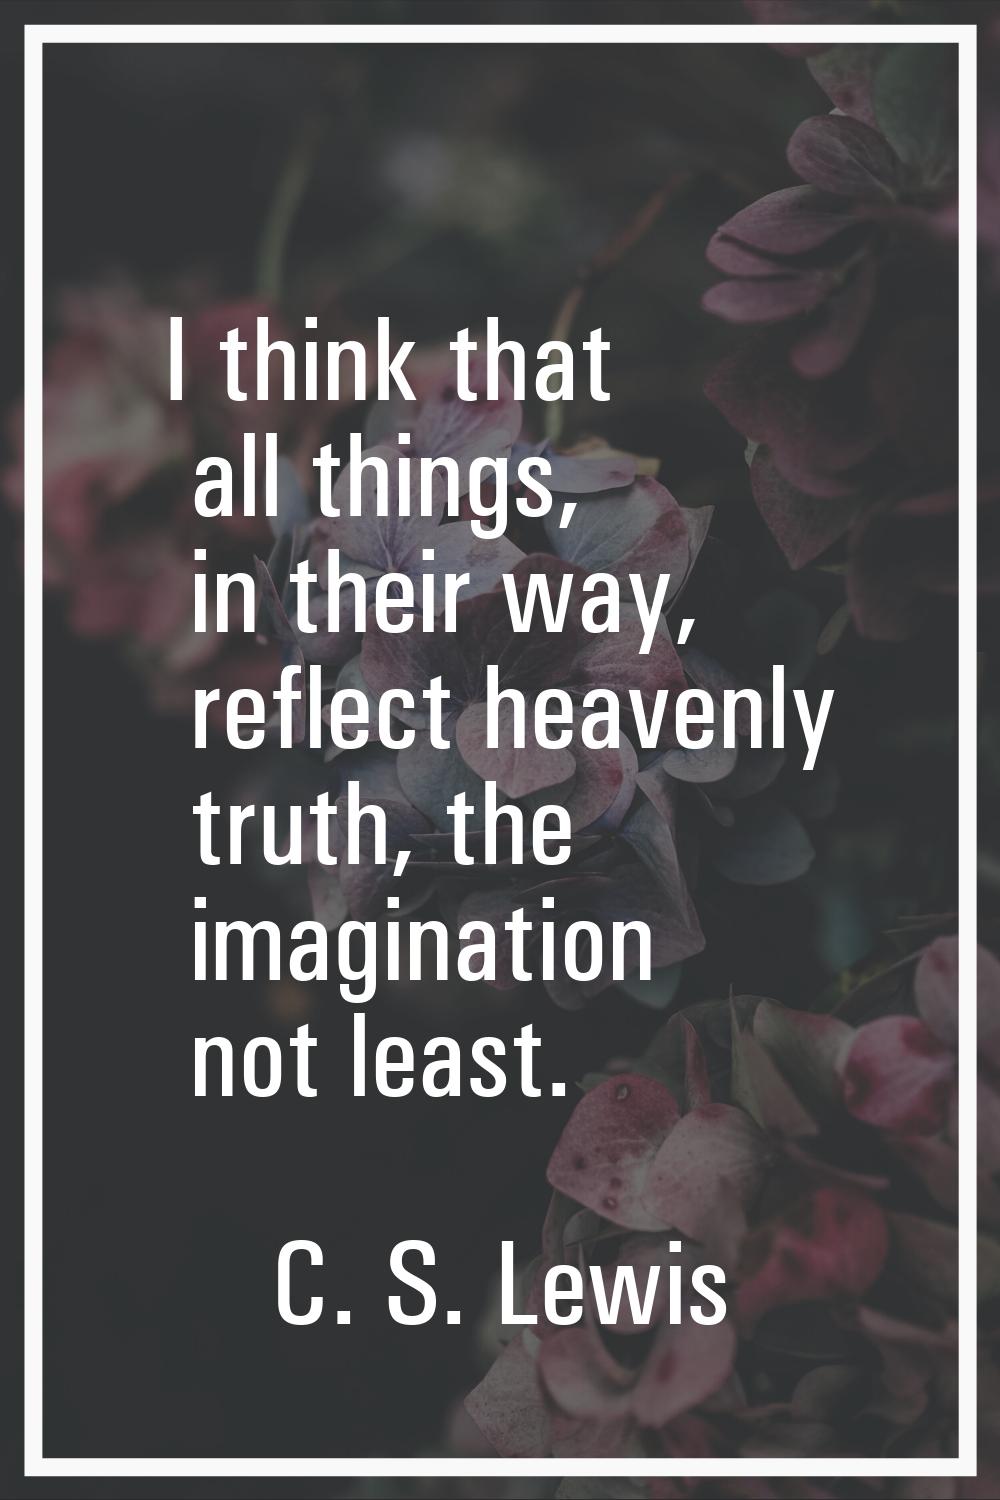 I think that all things, in their way, reflect heavenly truth, the imagination not least.